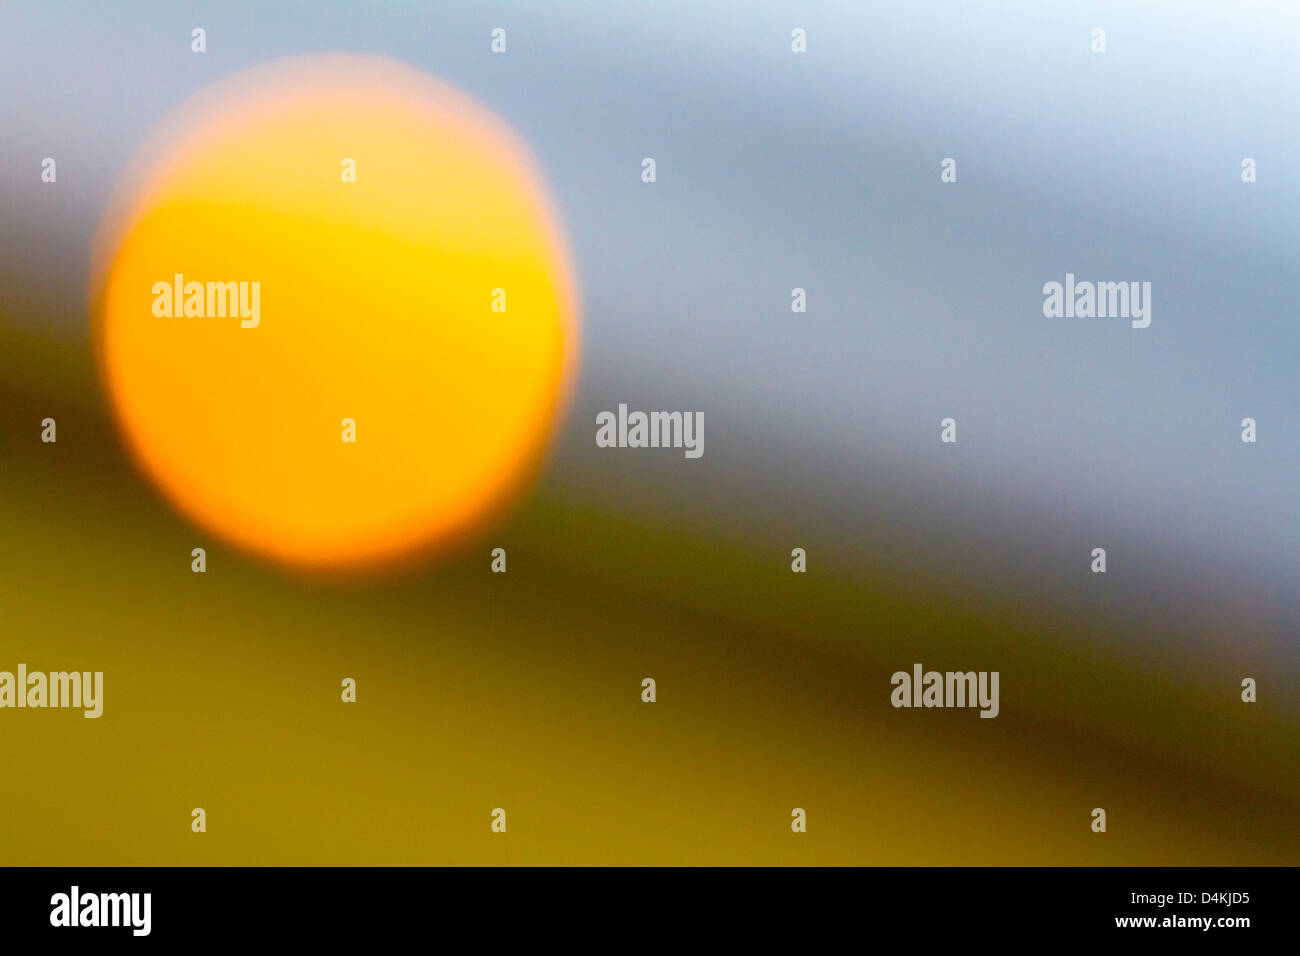 Abstract photo of a sun-like object on a sloping horizon Stock Photo